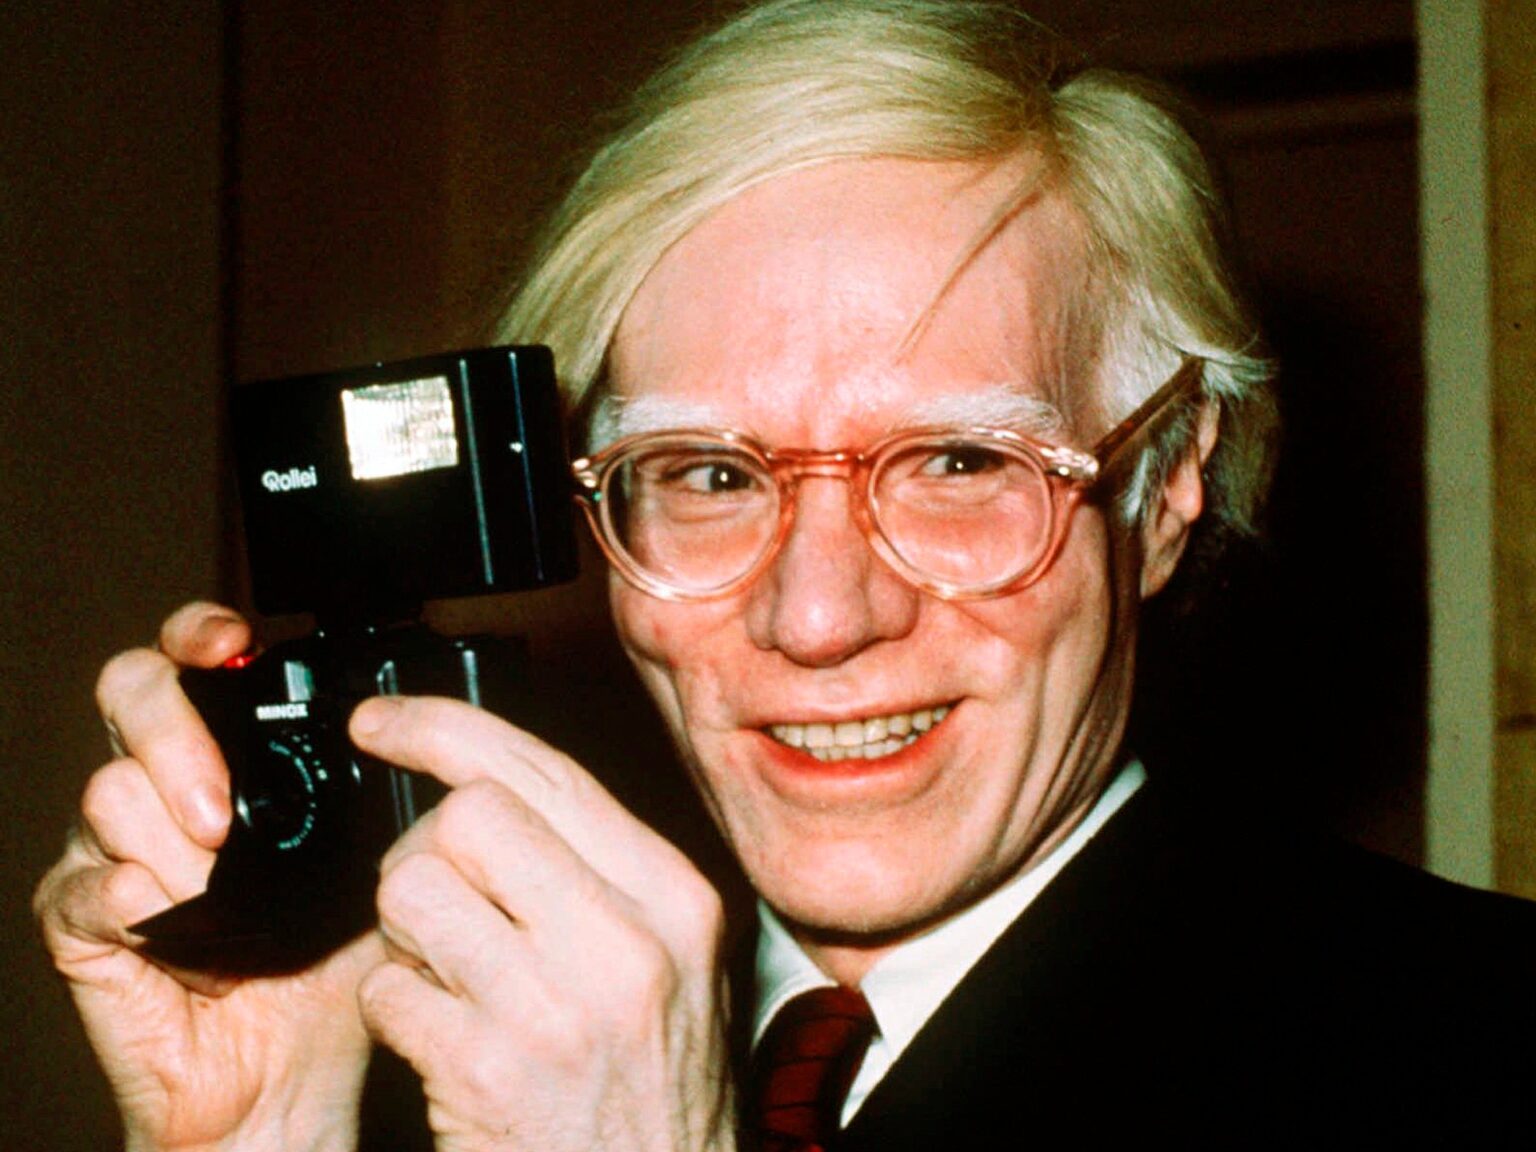 The US Supreme Court rules against artist Warhol